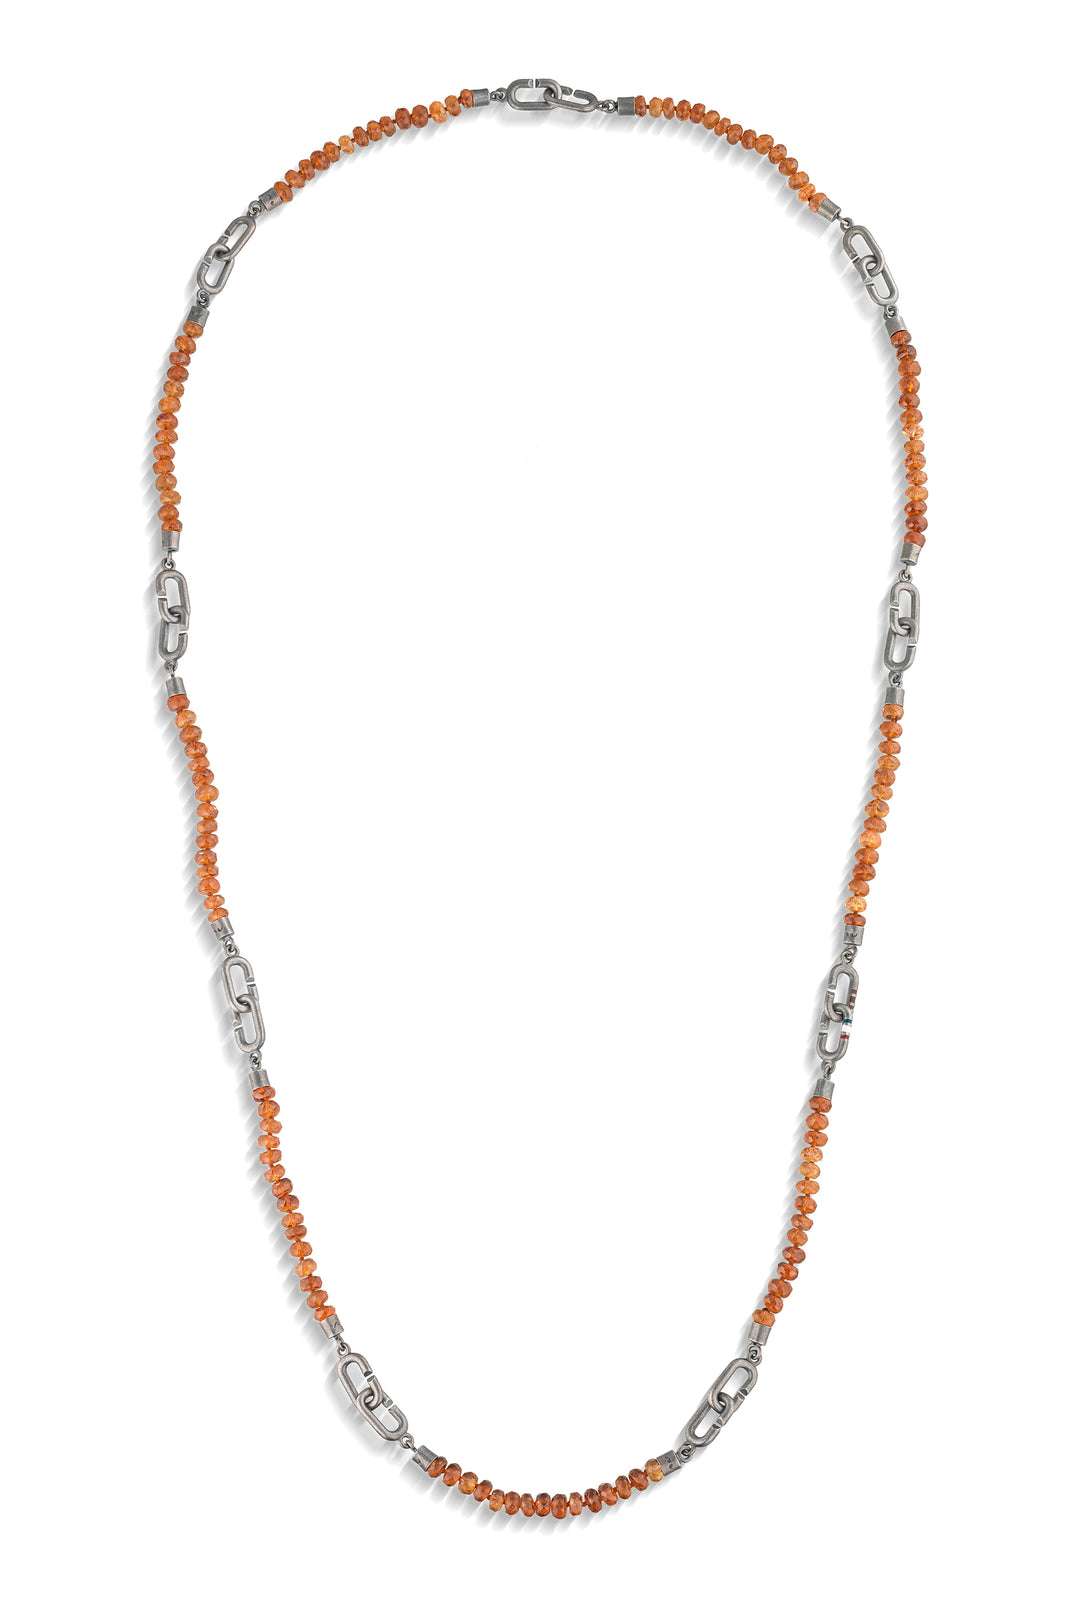 THE LINK Beaded Citrine Chain